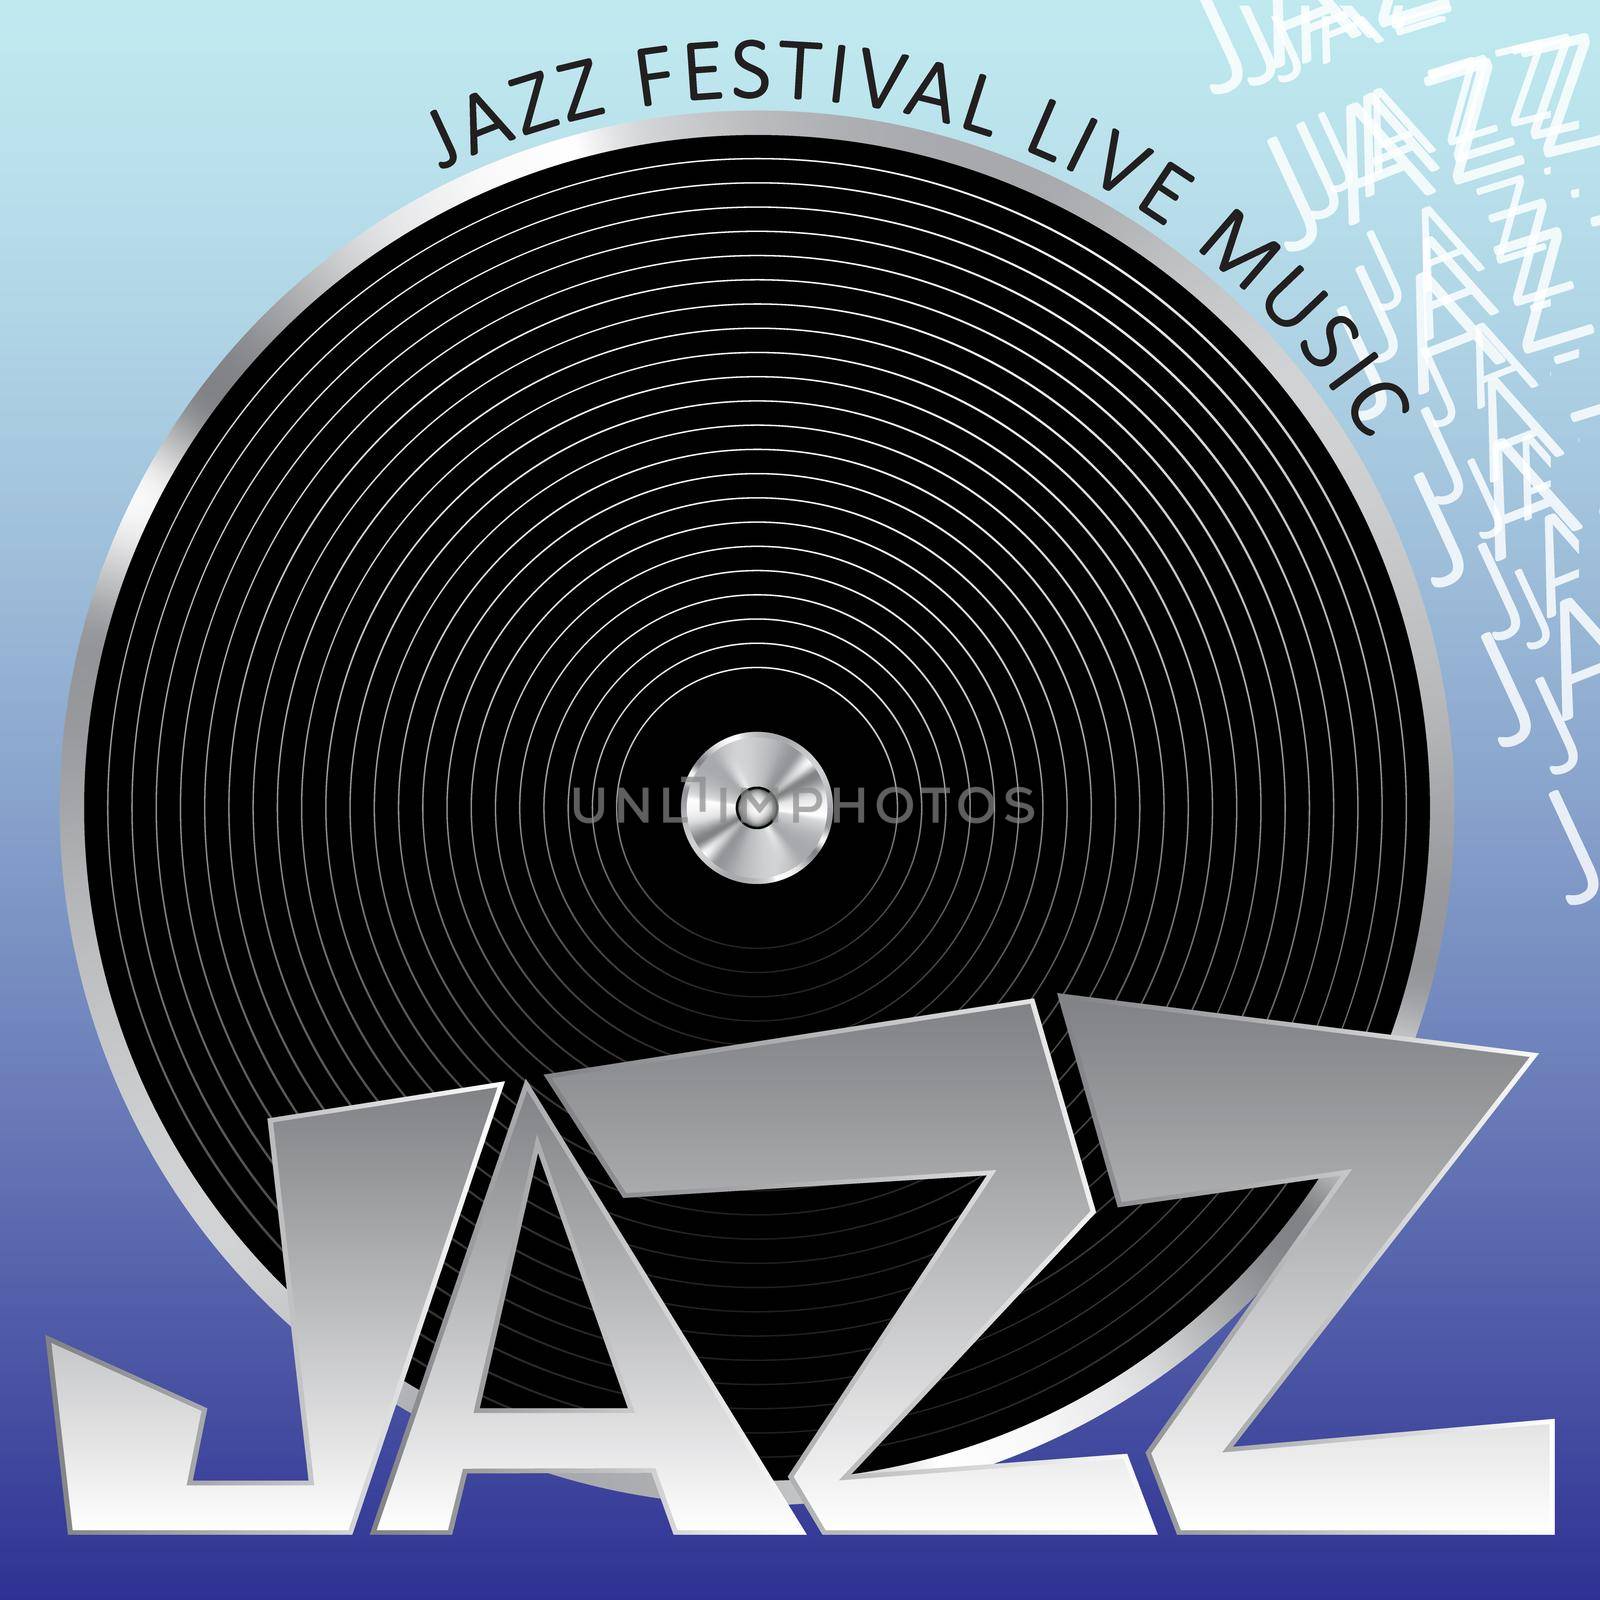 An example of a poster for a jazz festival.